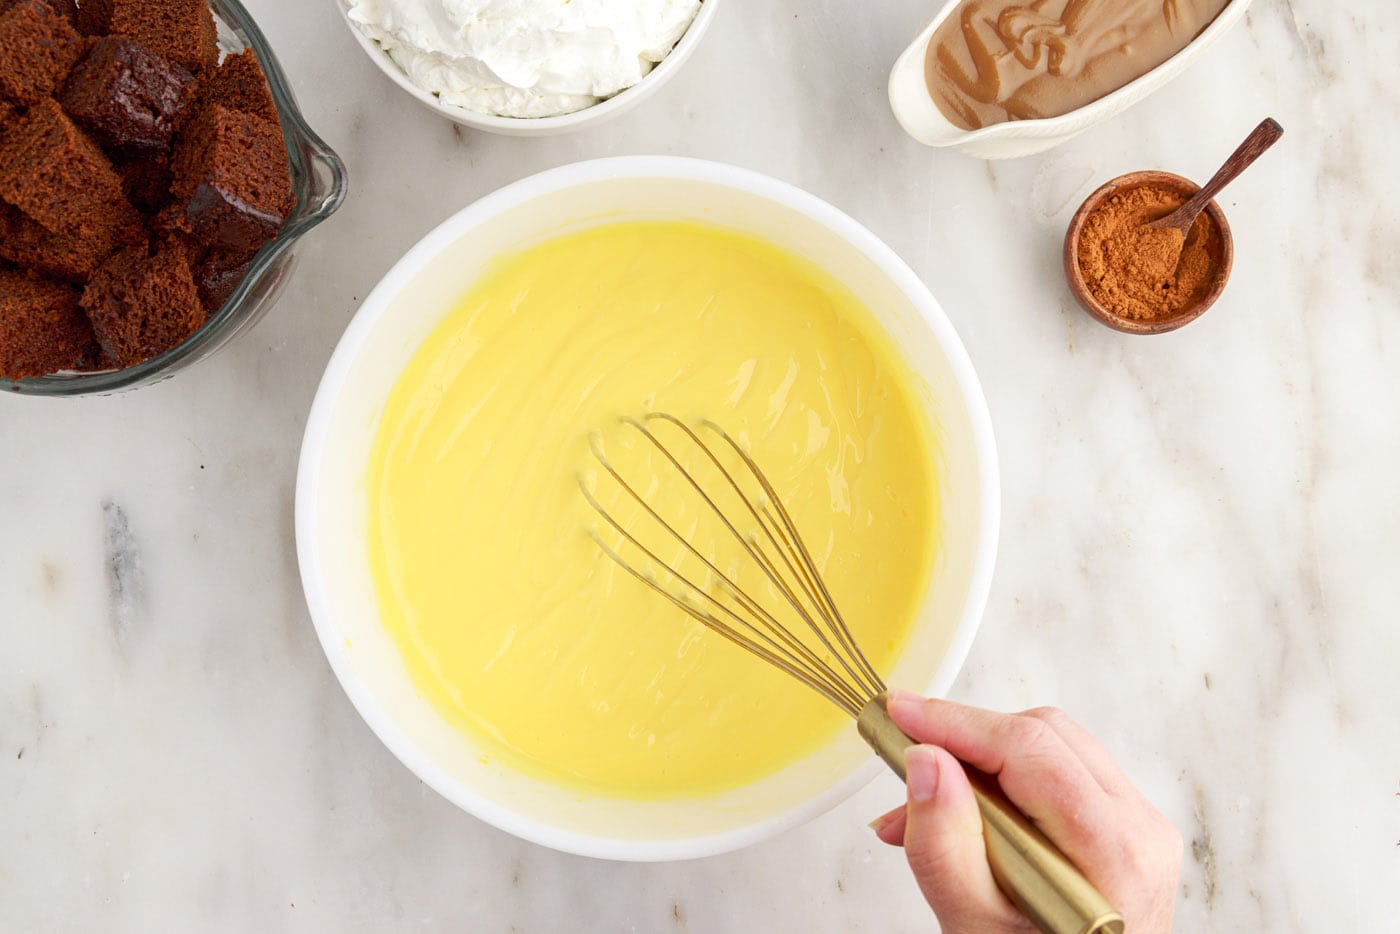 whisking instant vanilla pudding in a bowl